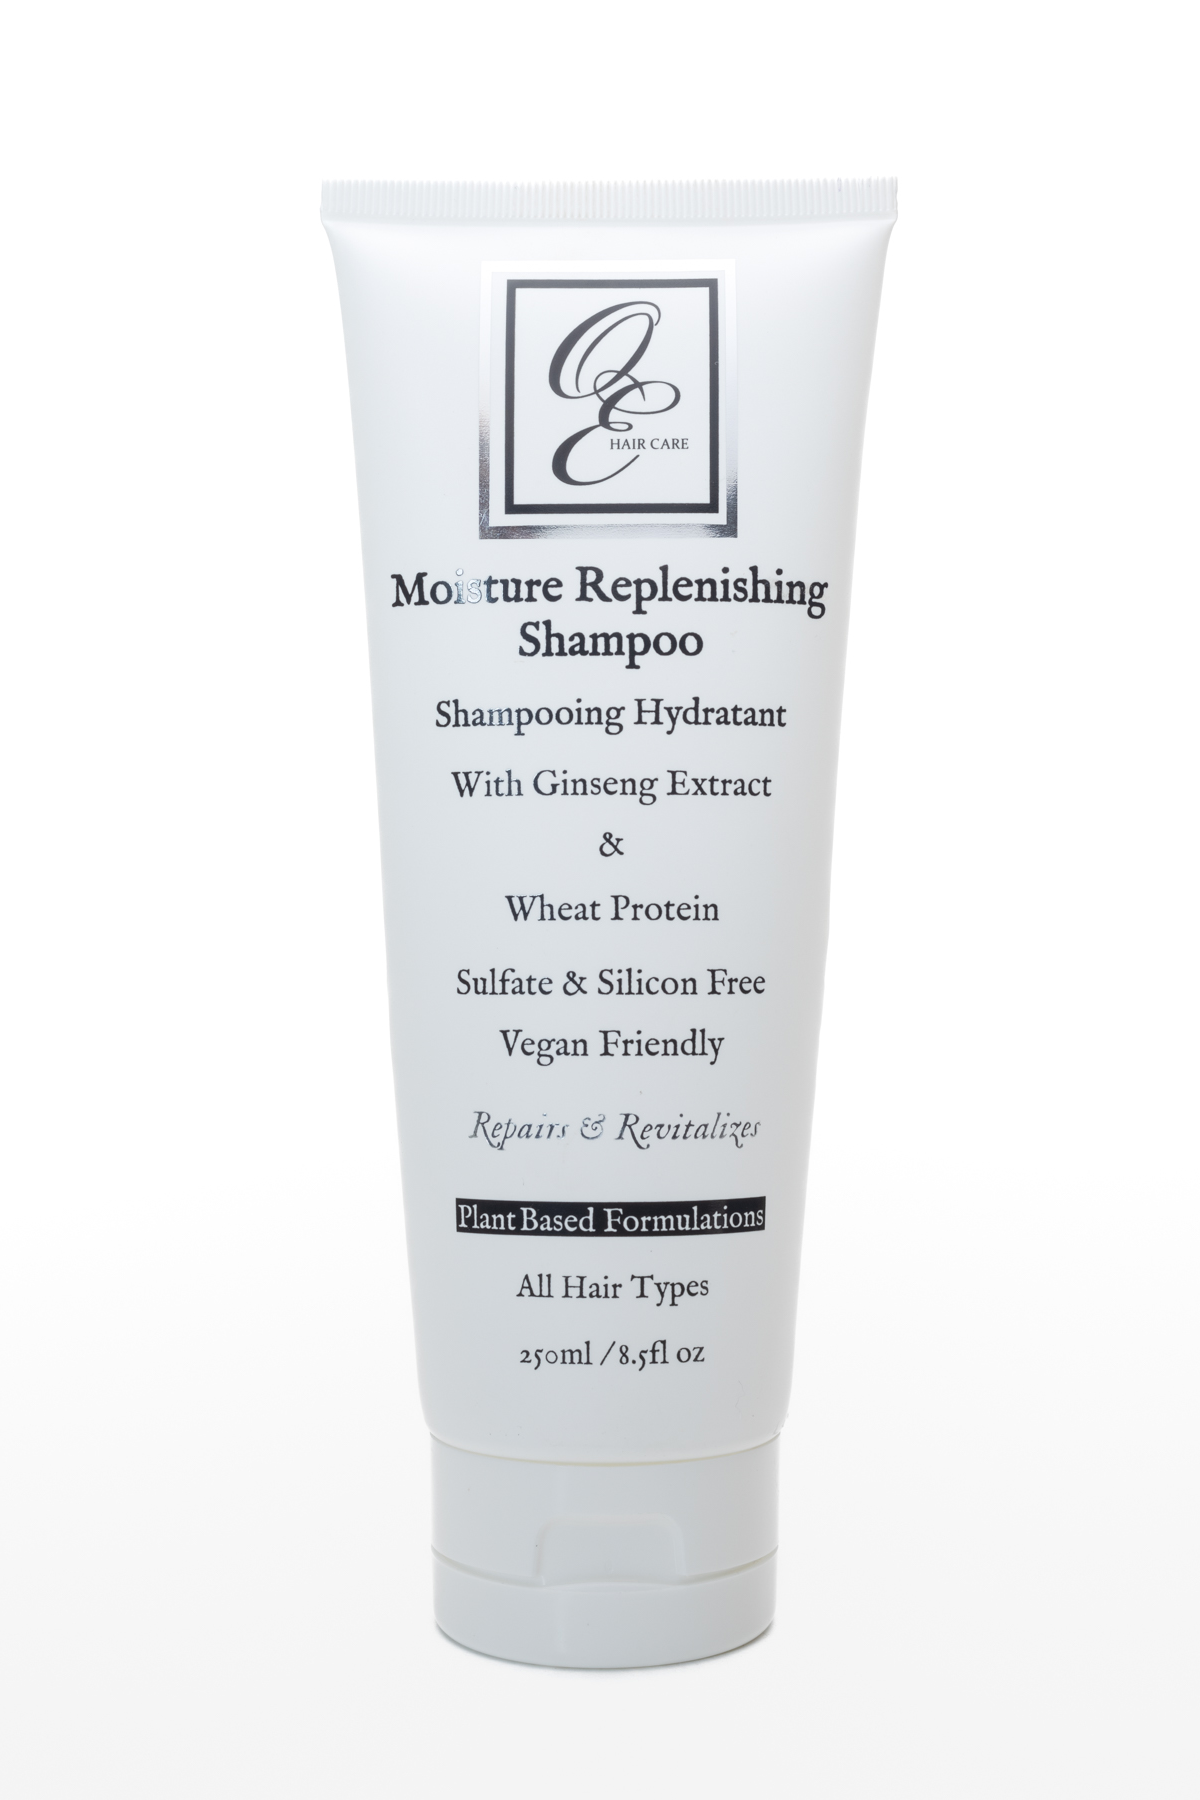 Moisture Replenishing Shampoo with Ginseng extract & Wheat Protein